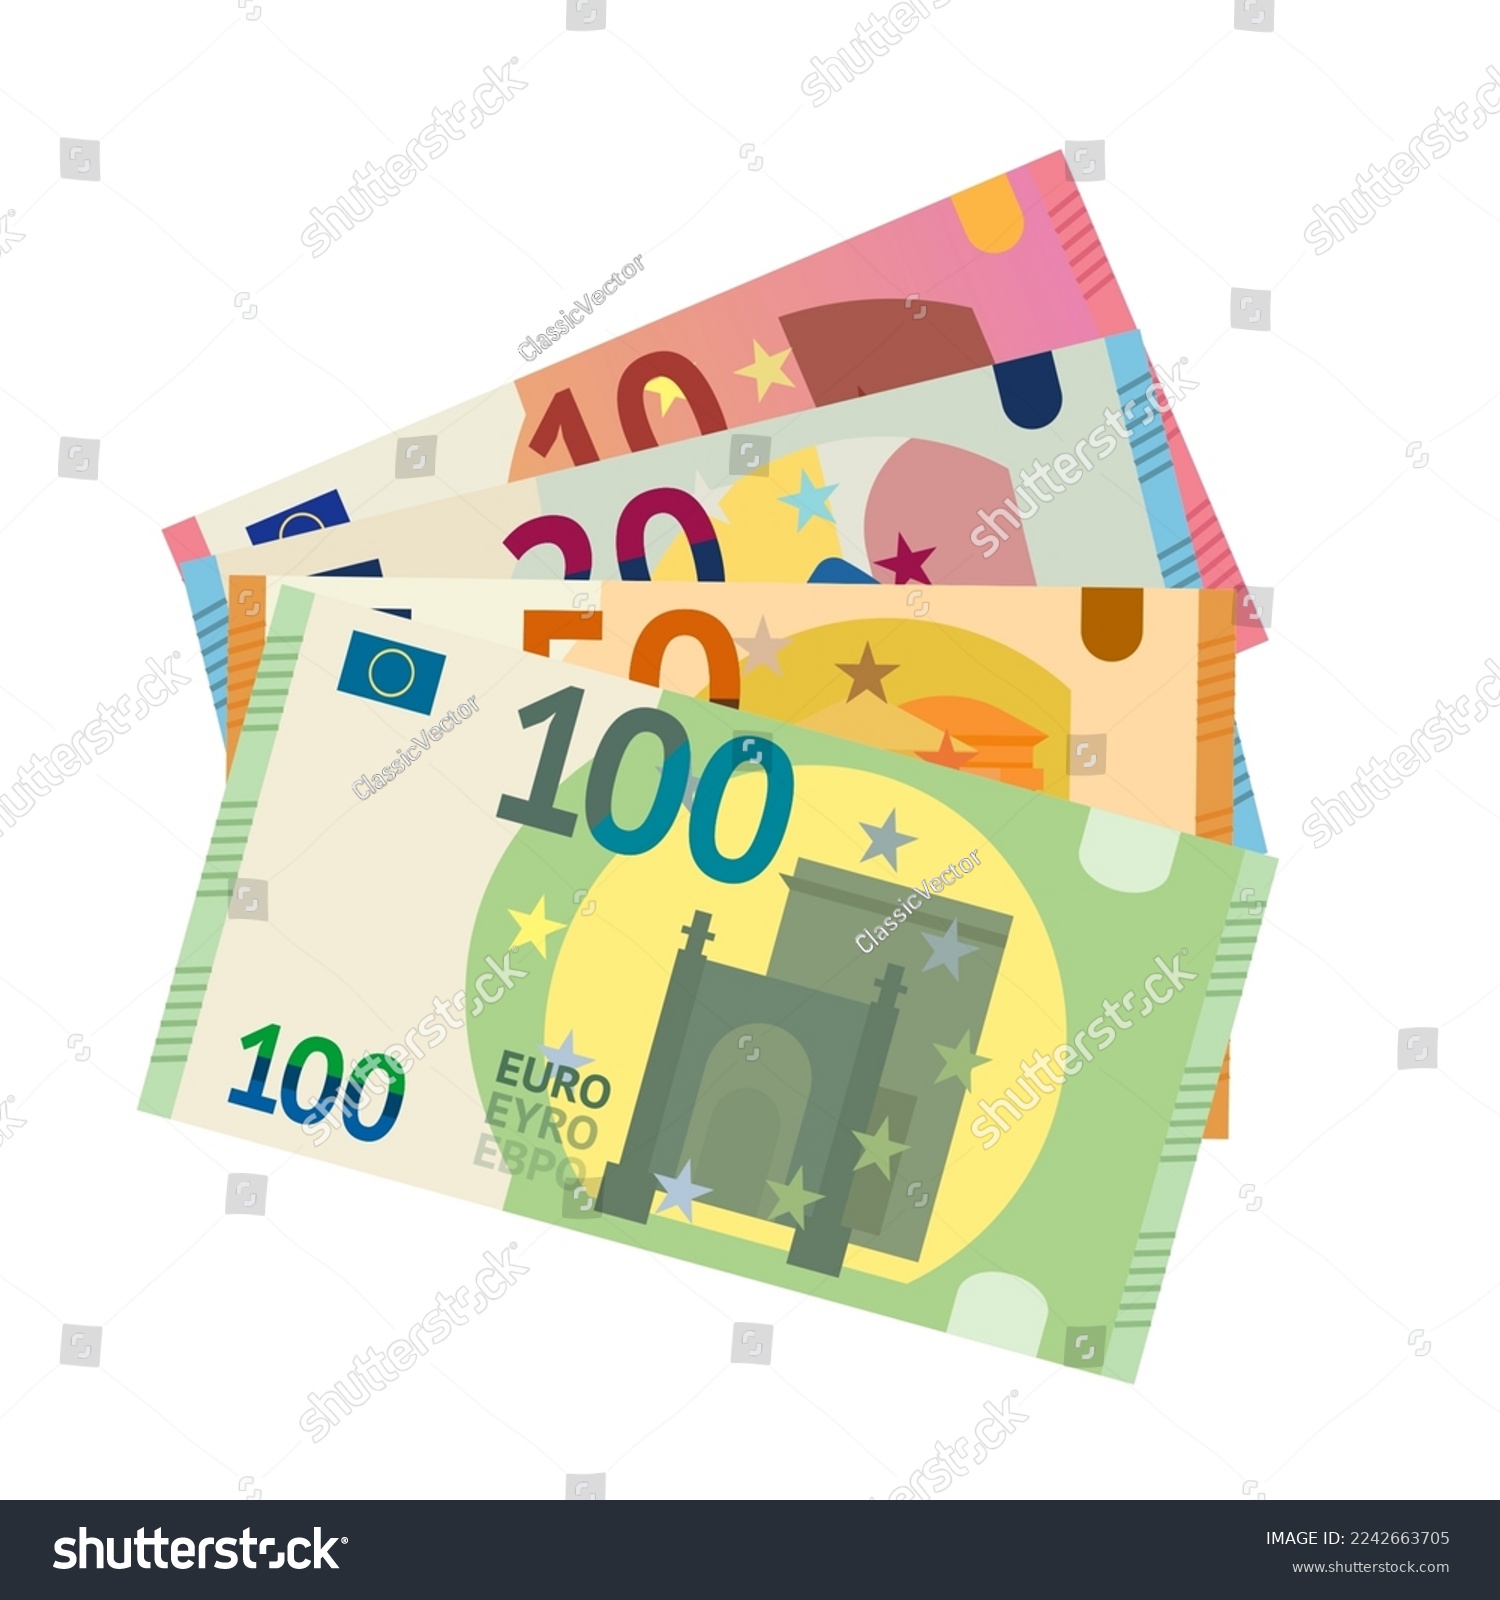 SVG of Euro paper money set vector illustration. Cartoon isolated European banknotes collection and fan of bills in denominations of 10, 20, 50 and 100 euros, front view of cash currency pile from Europe svg